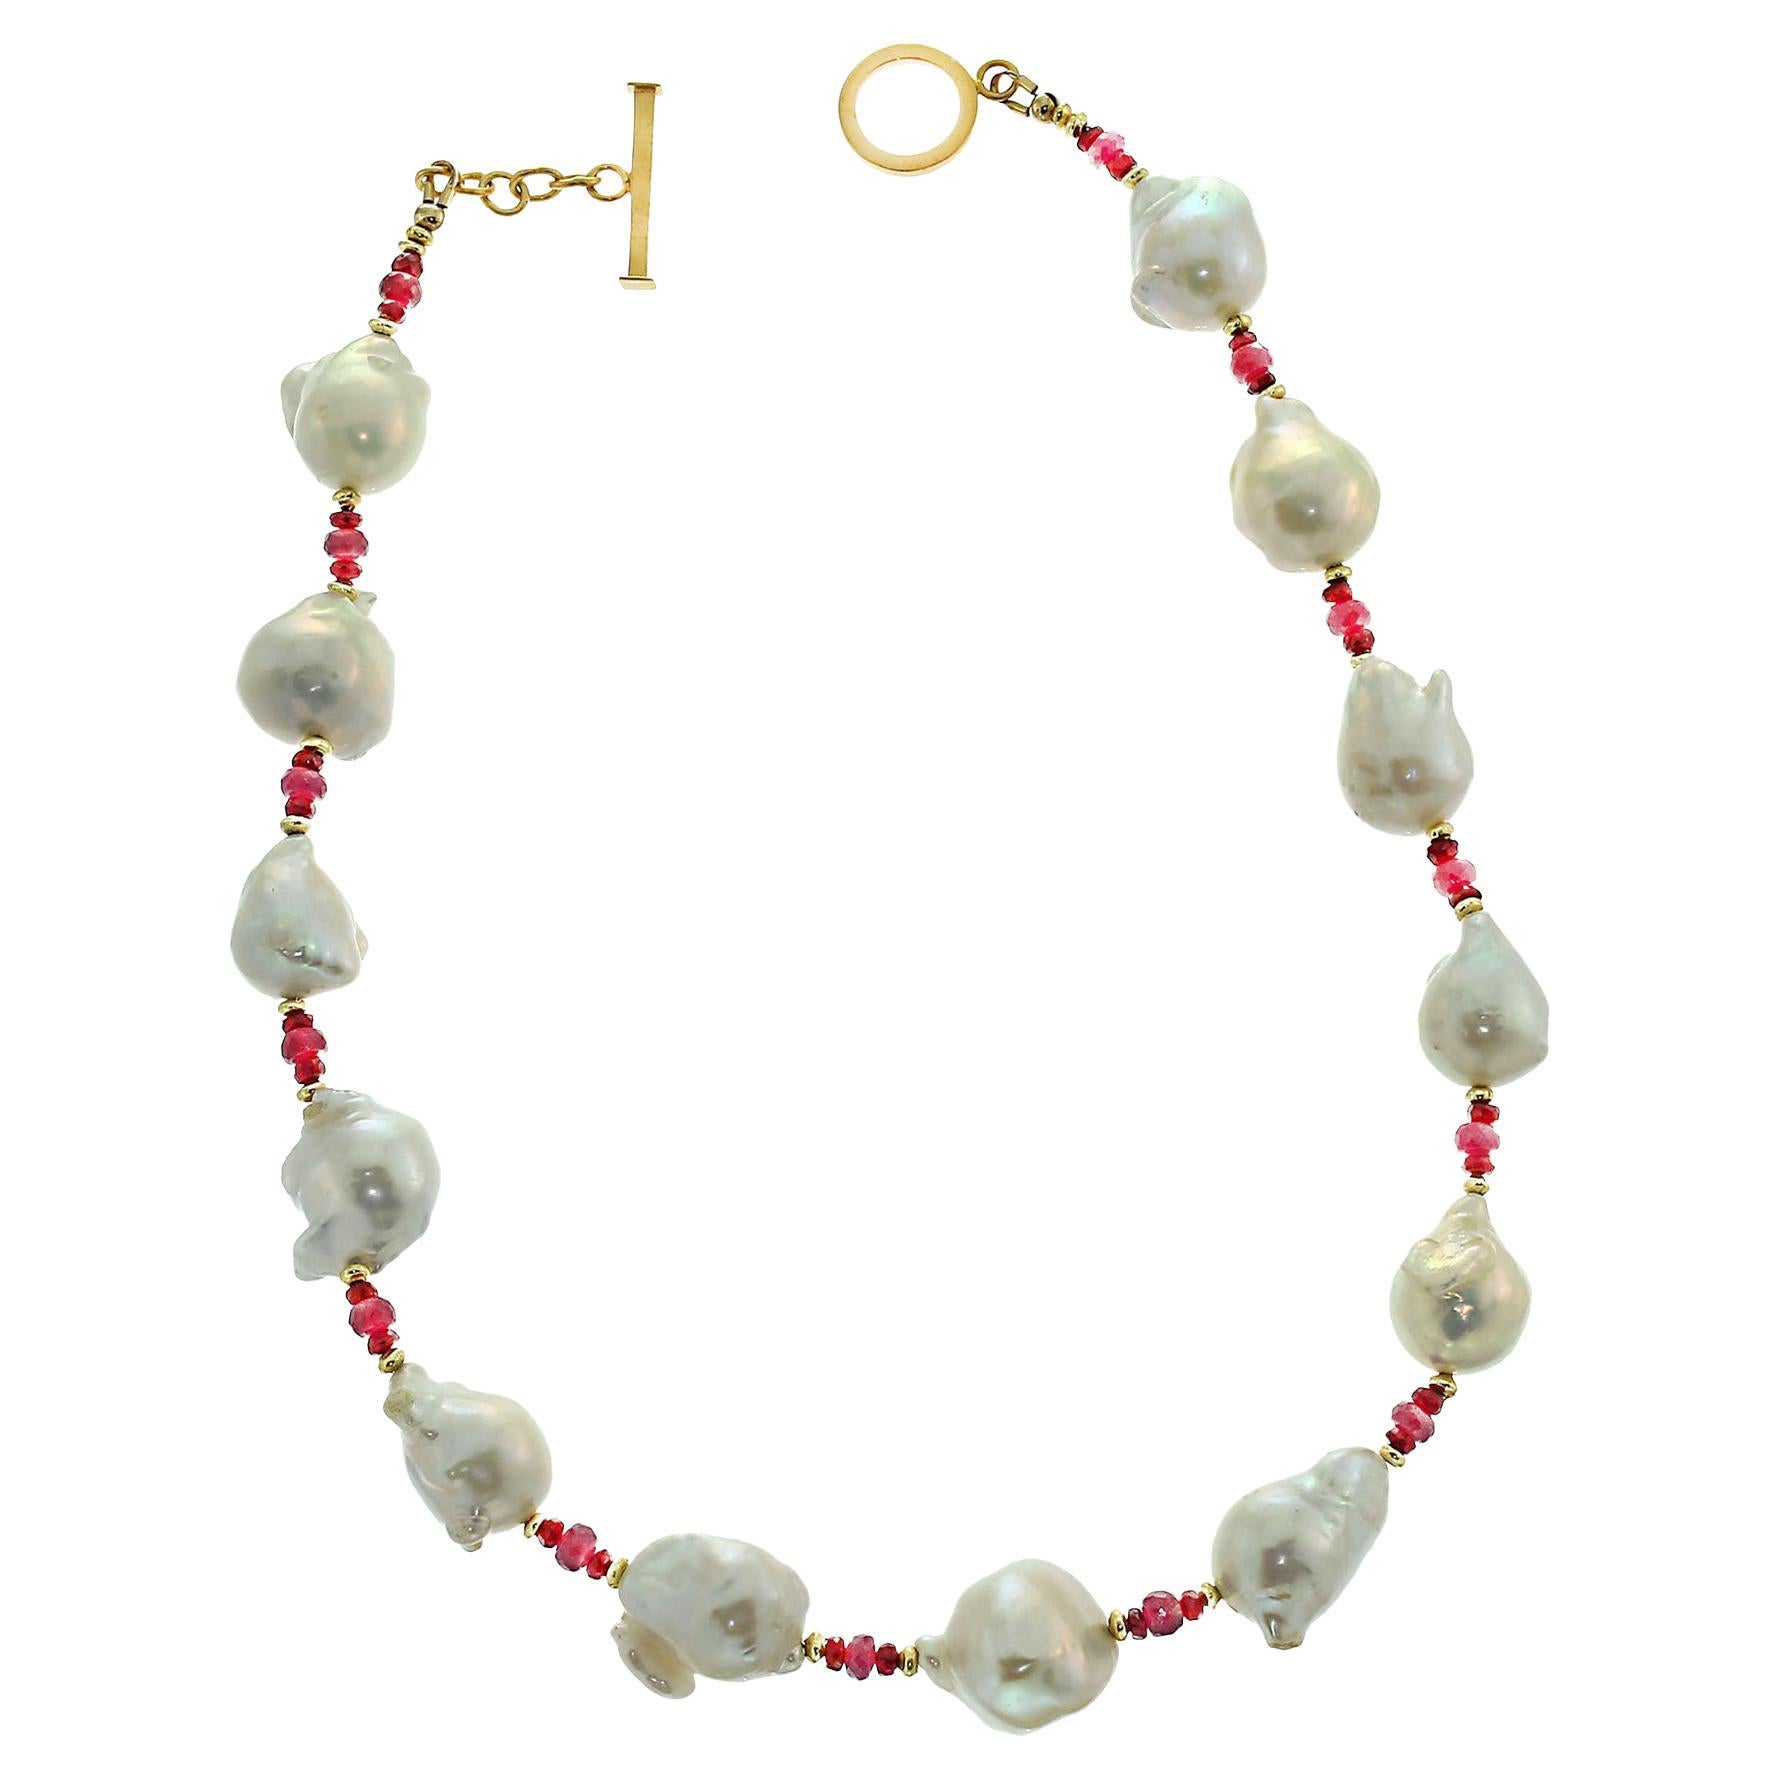 Own the jewelry you wish for

Pearls and Rubies make this custom made Choker Necklace a 'must have' in your wardrobe. These Baroque Pearls are iridescent and flash pink and yellow, each is a unique shape due to bits of nacre developing at odd